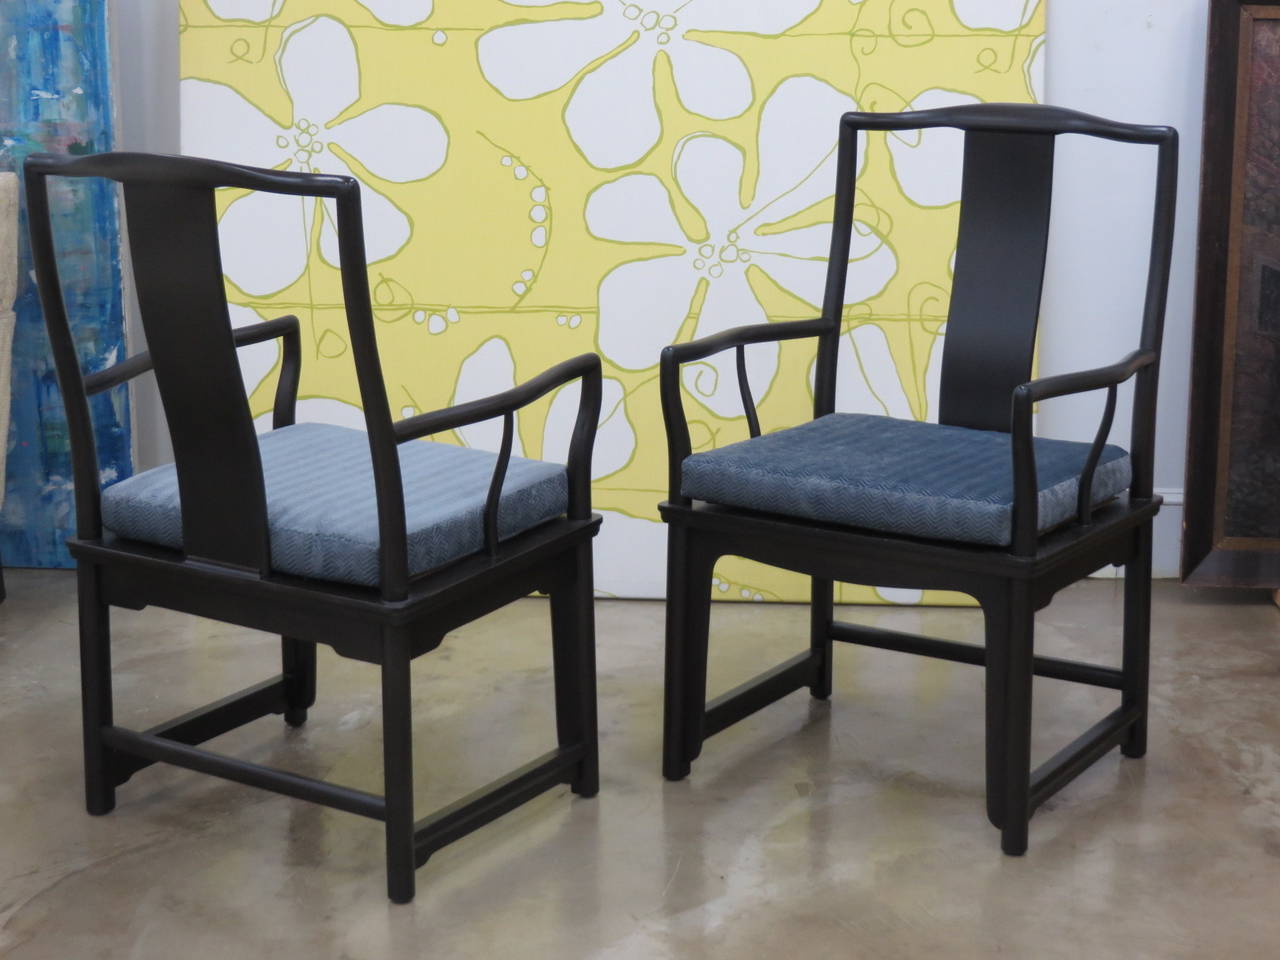 Pair of 1950s baker armchairs, recently refinished and reupholstered. Can be used for dining, office or as occasional chairs. Fine construction and design.